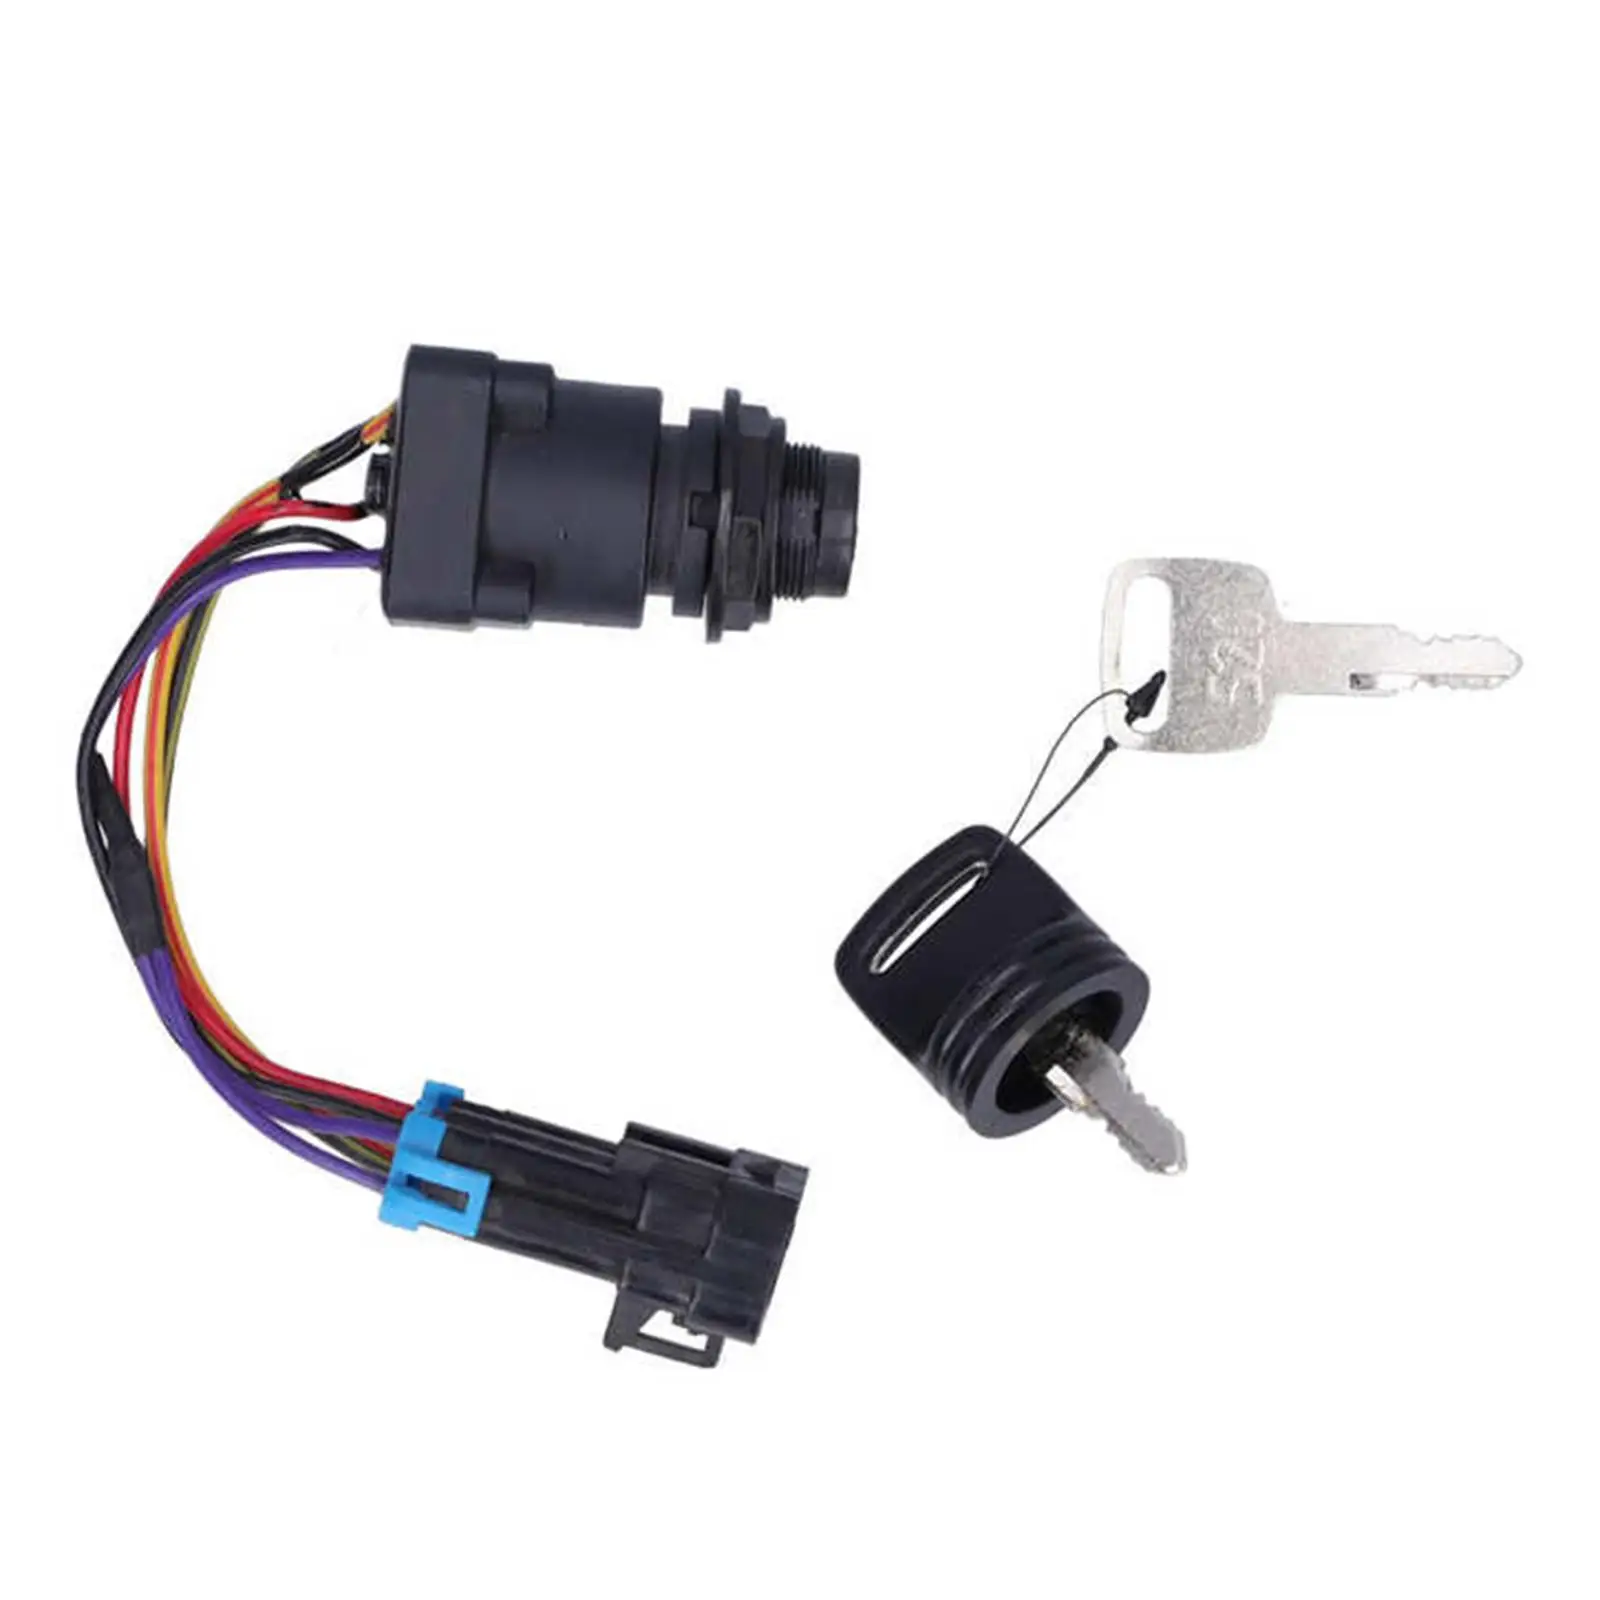 Boat Ignition Switch with Key 6 Wire Connectors 893353A03 for Mercury DTS Upgrade